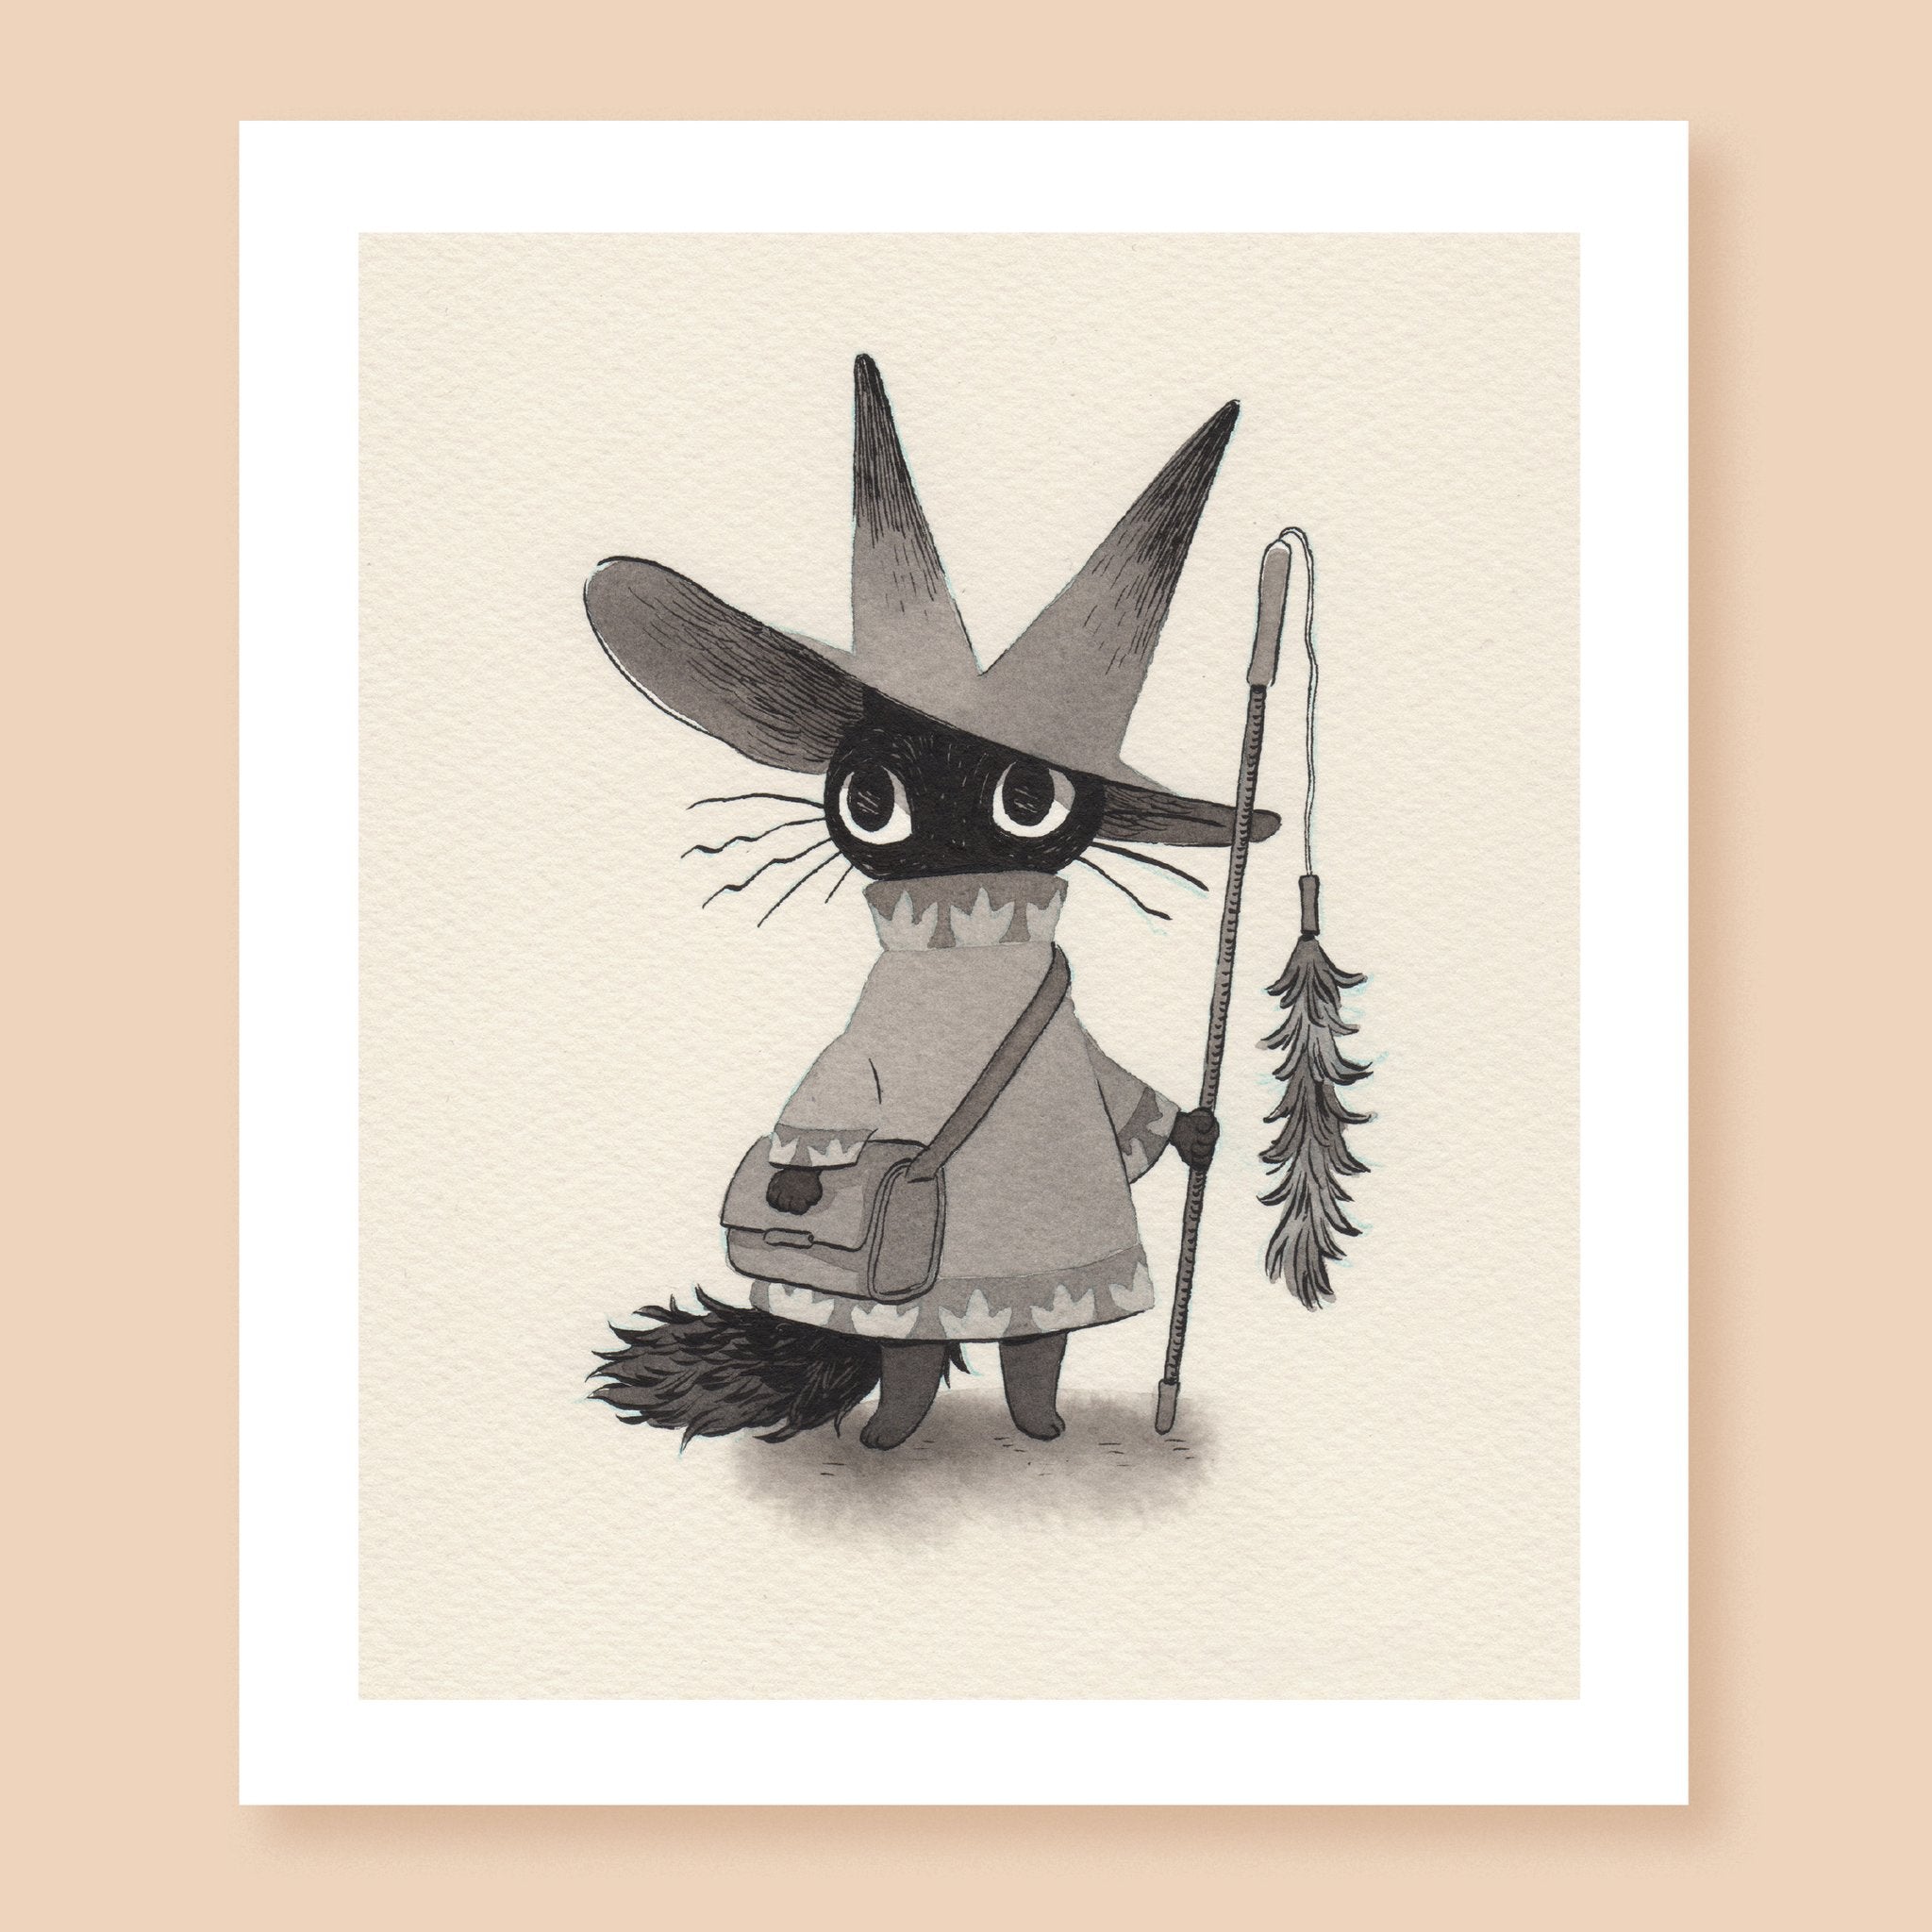 Print of a monochromatic greyscale ink artwork depicting a black cat wearing wizard's robes and holding a cat toy as their staff. Their pointy wizard's hat has two points, one for each long ear.